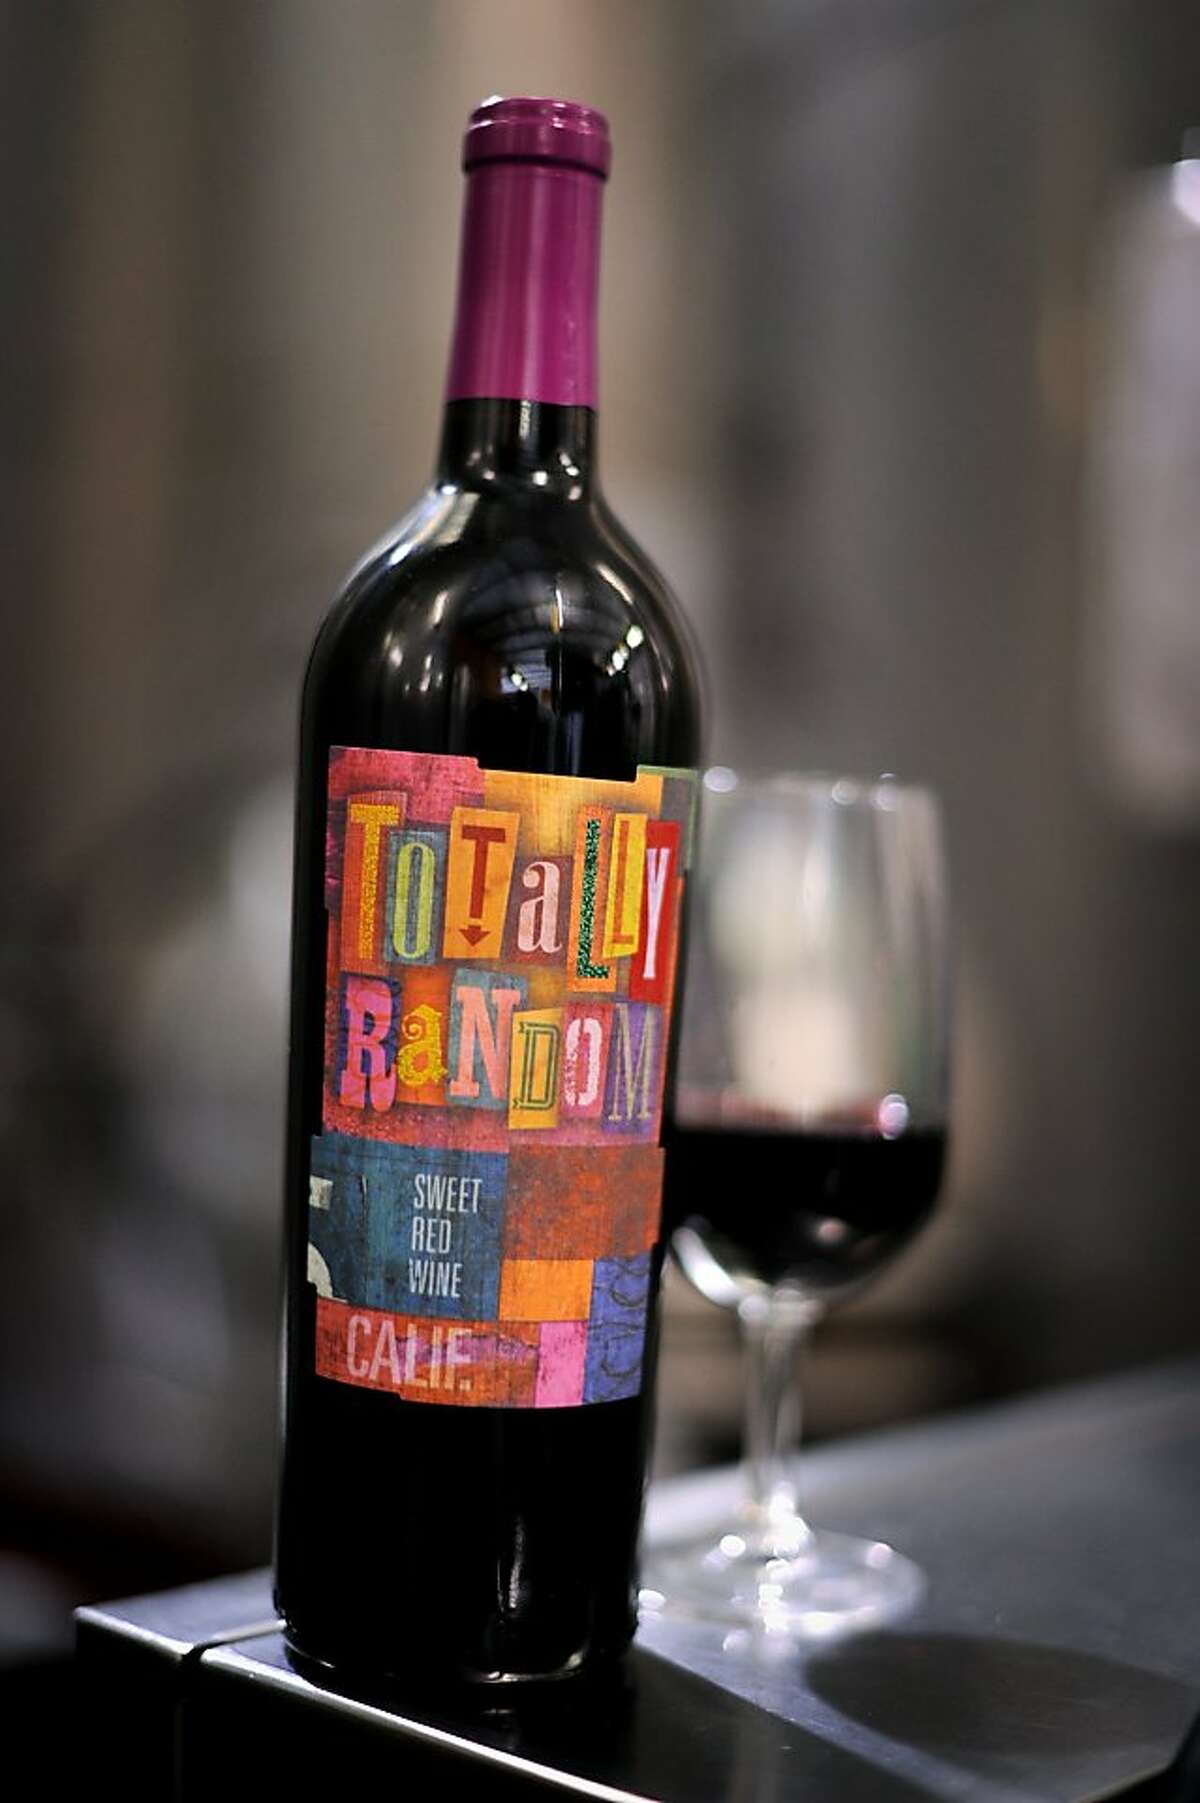 Totally Random, a sweet red wine created by Adler Fels Winery in Santa Rosa, California. The wine was created to attract the younger drinking market. September, 30 2011.